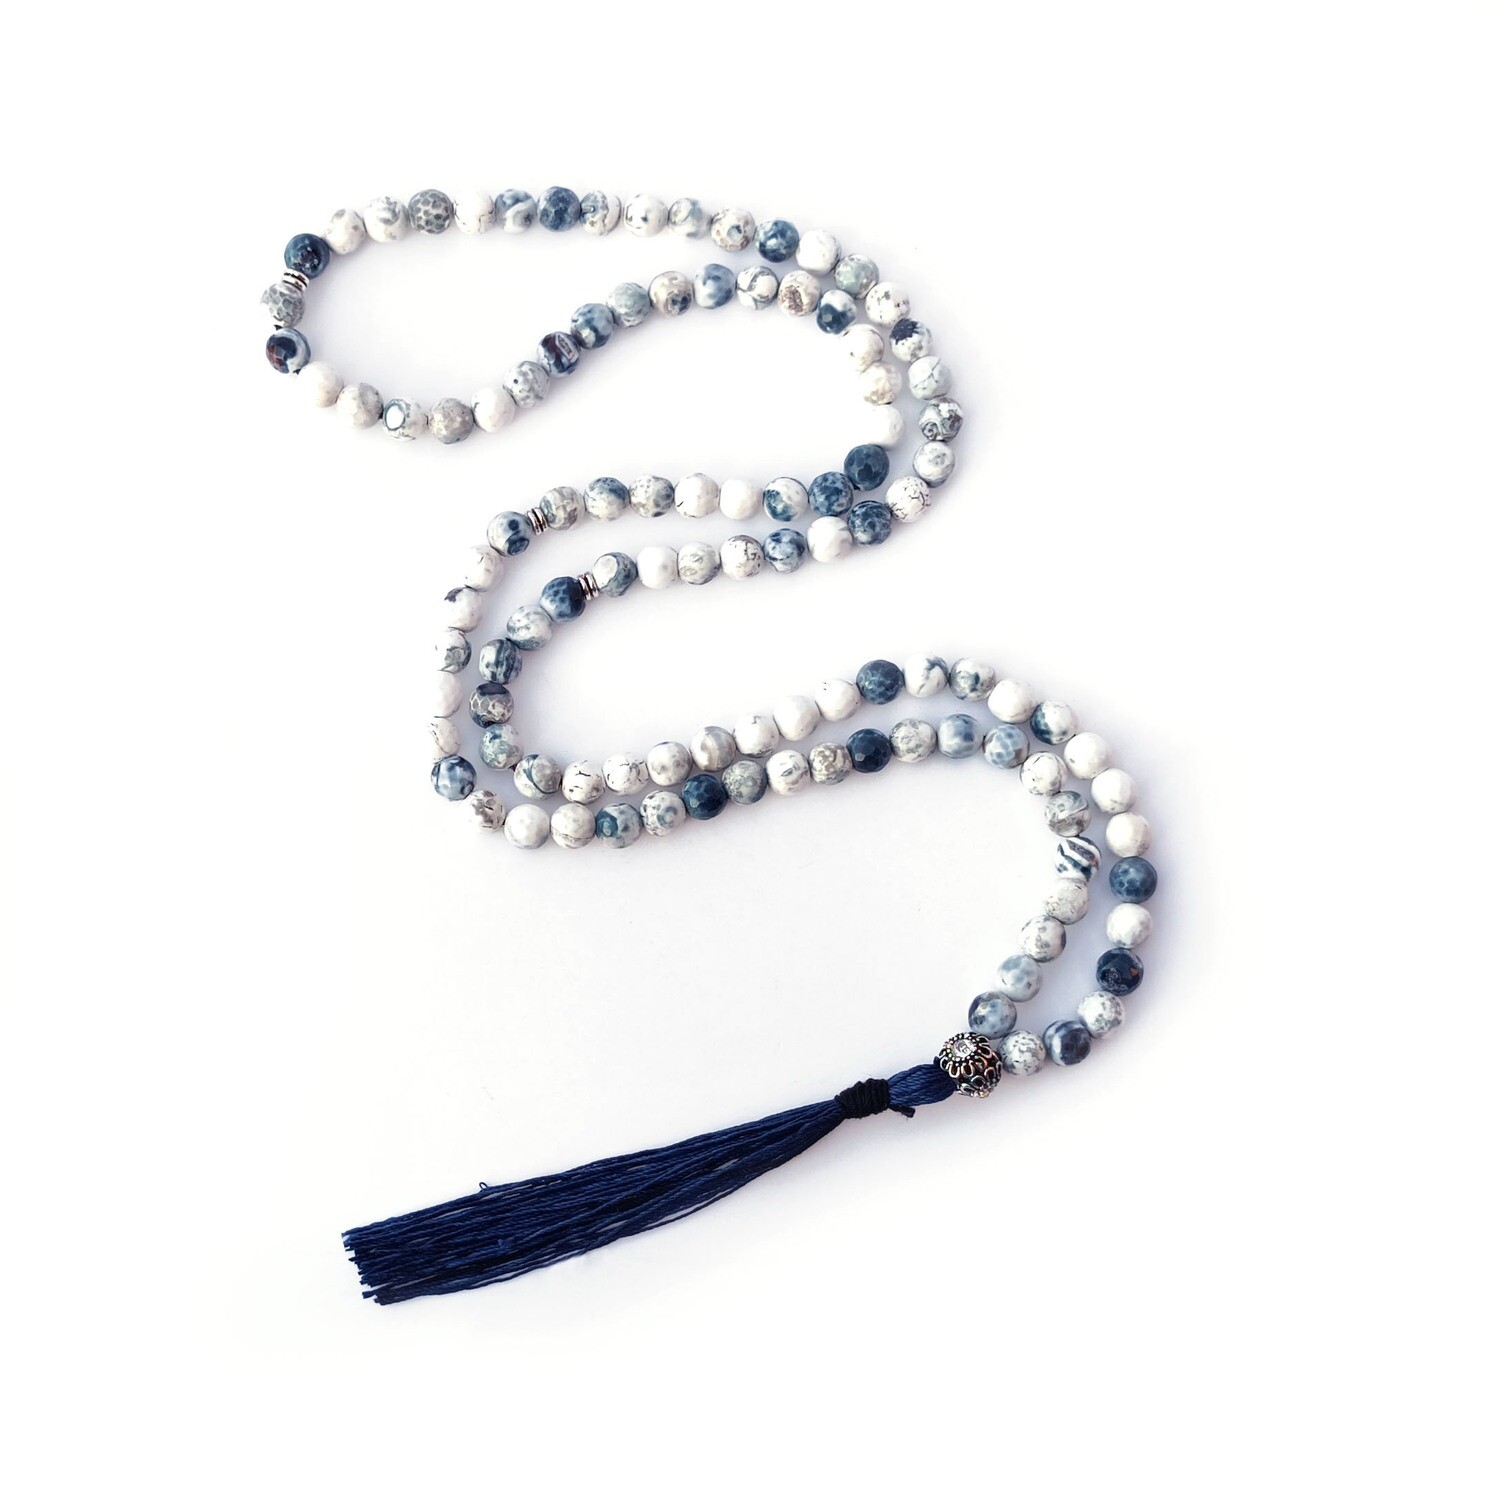 Faceted White and Blue Agate Mala